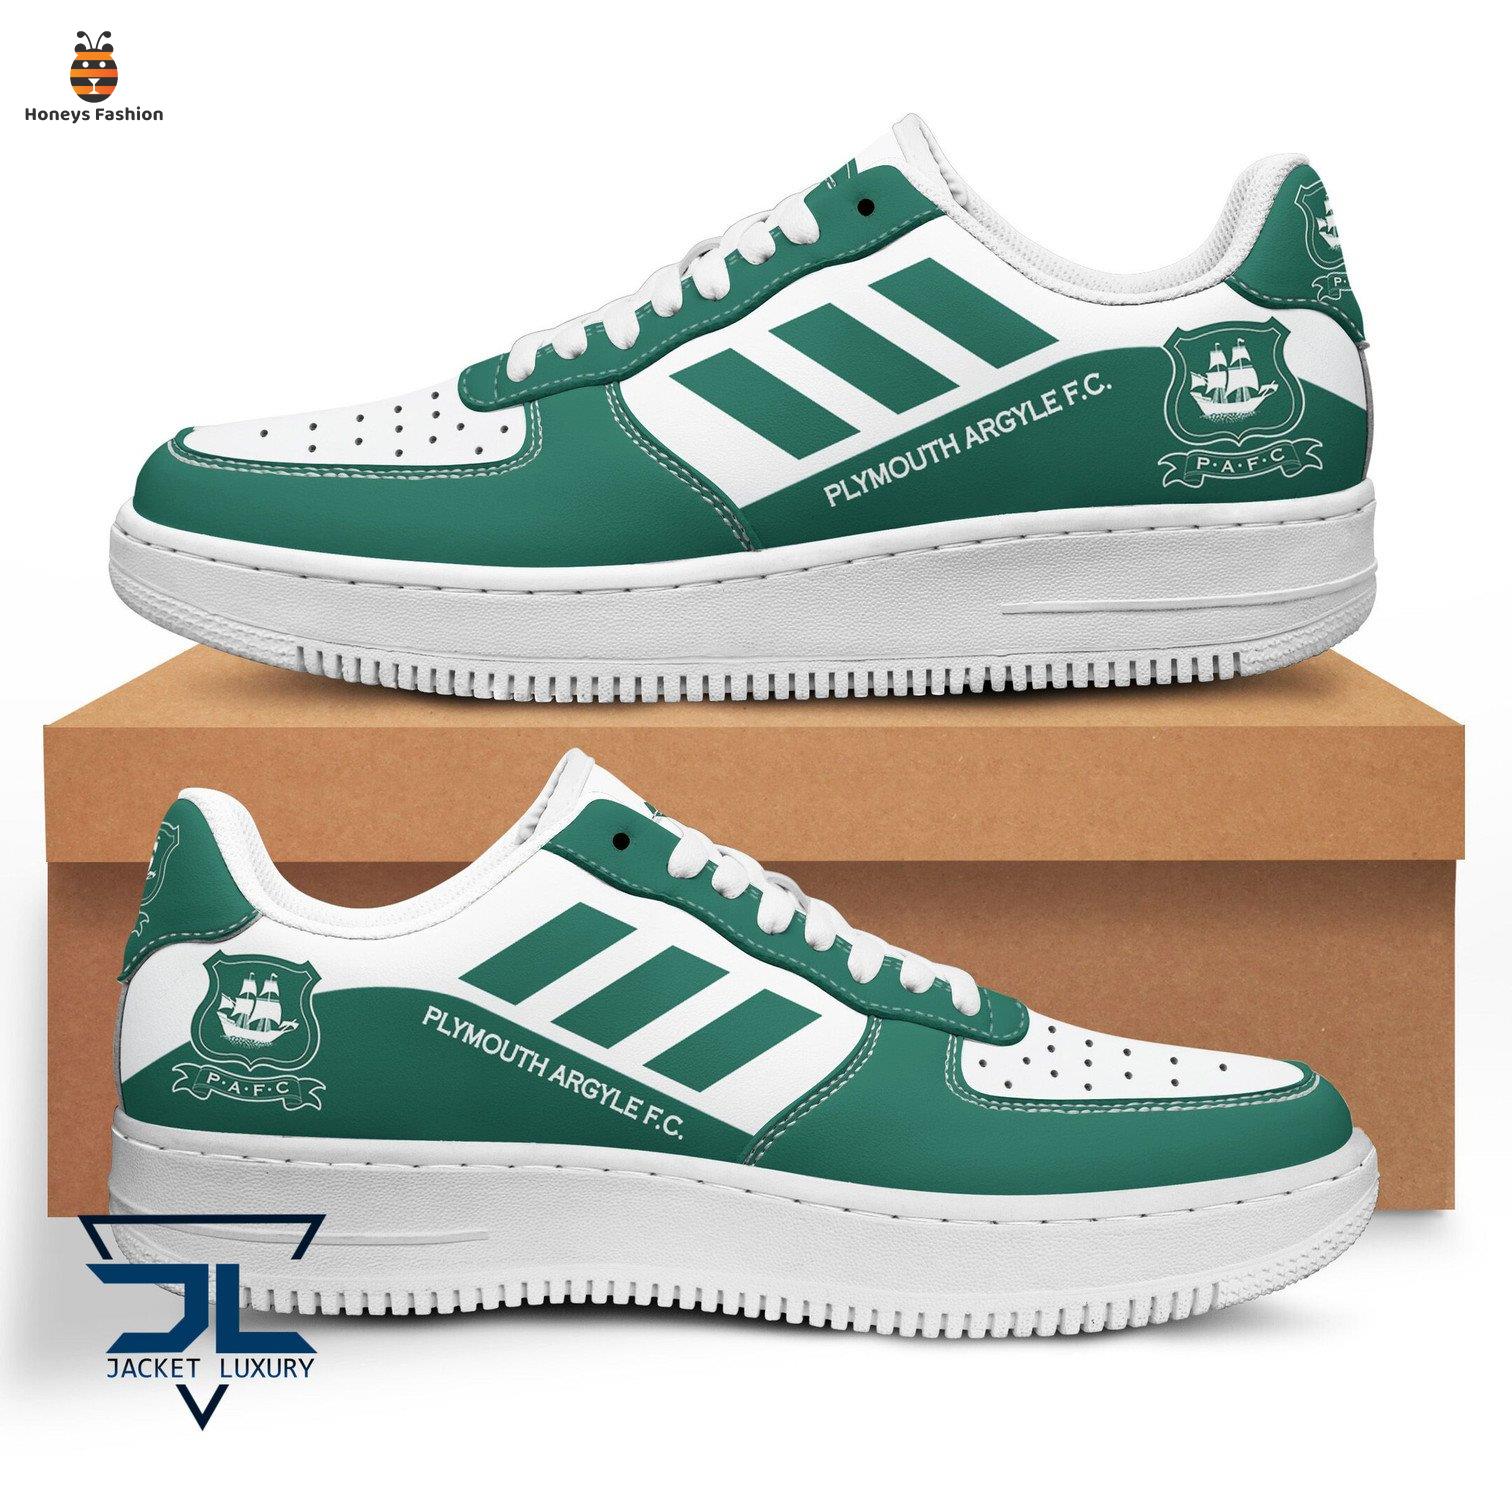 Plymouth Argyle F.C air force 1 shoes